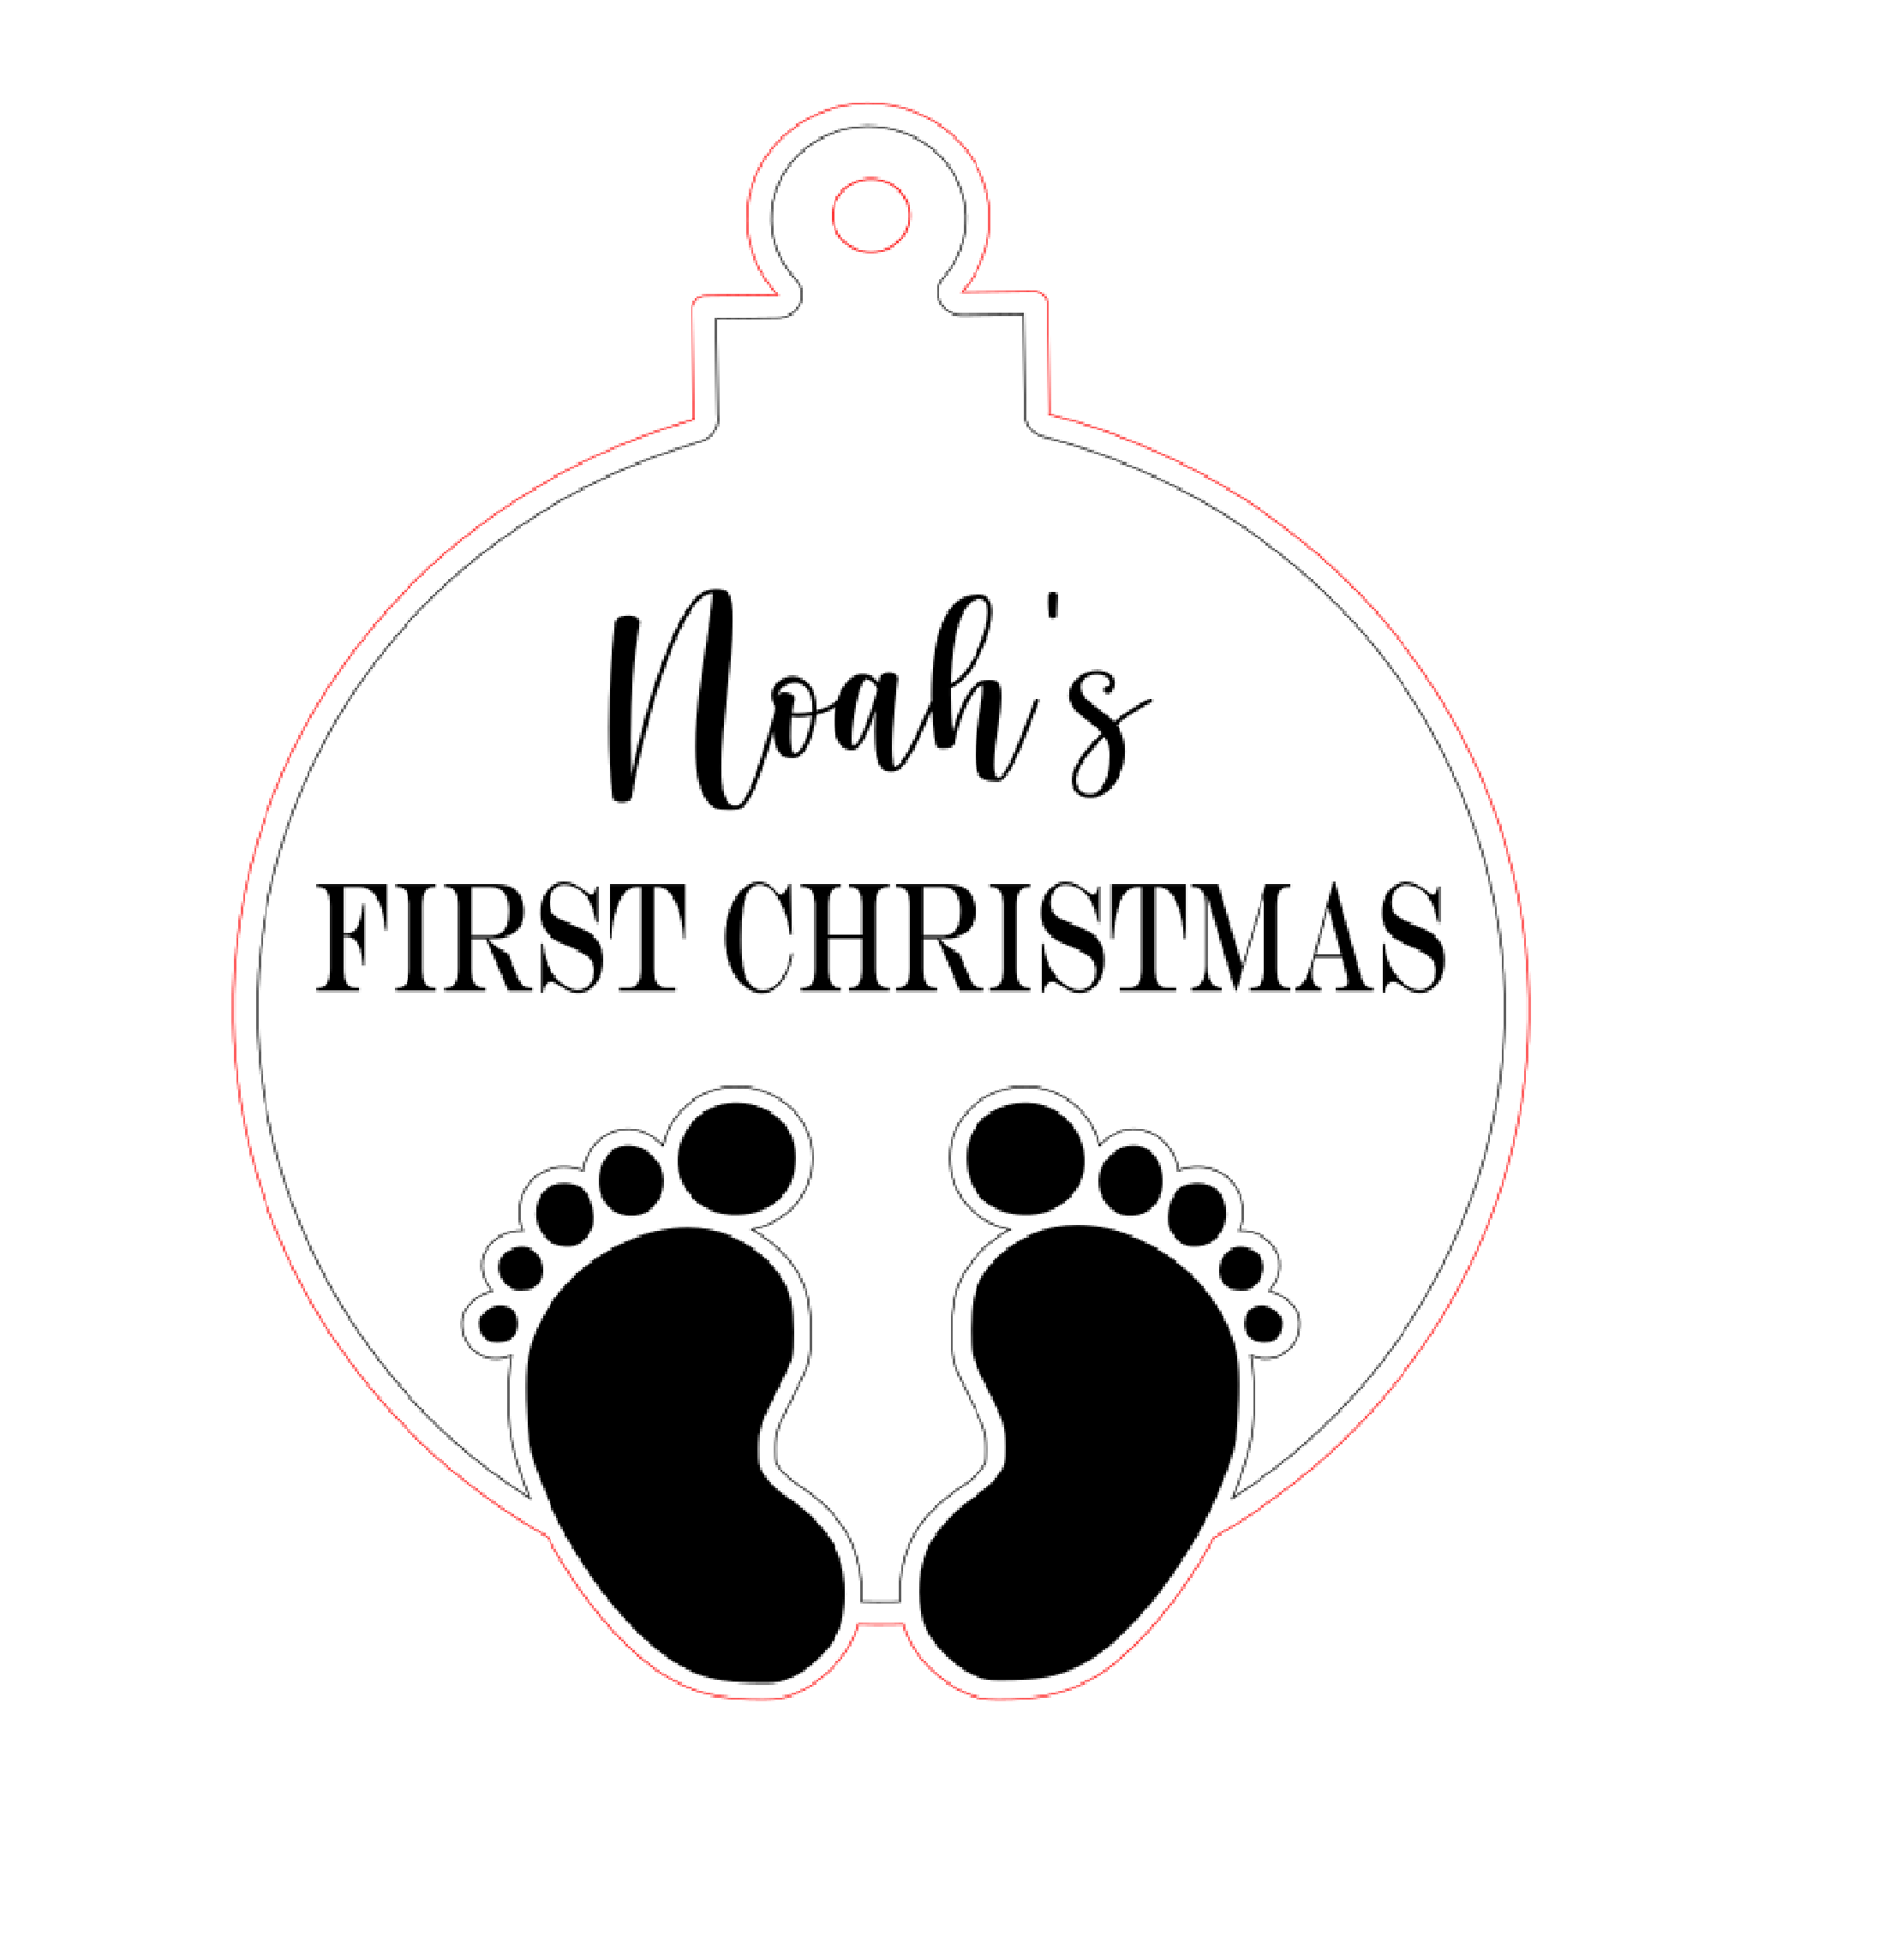 Name + First Christmas + Baby Footprints Ornament Bauble